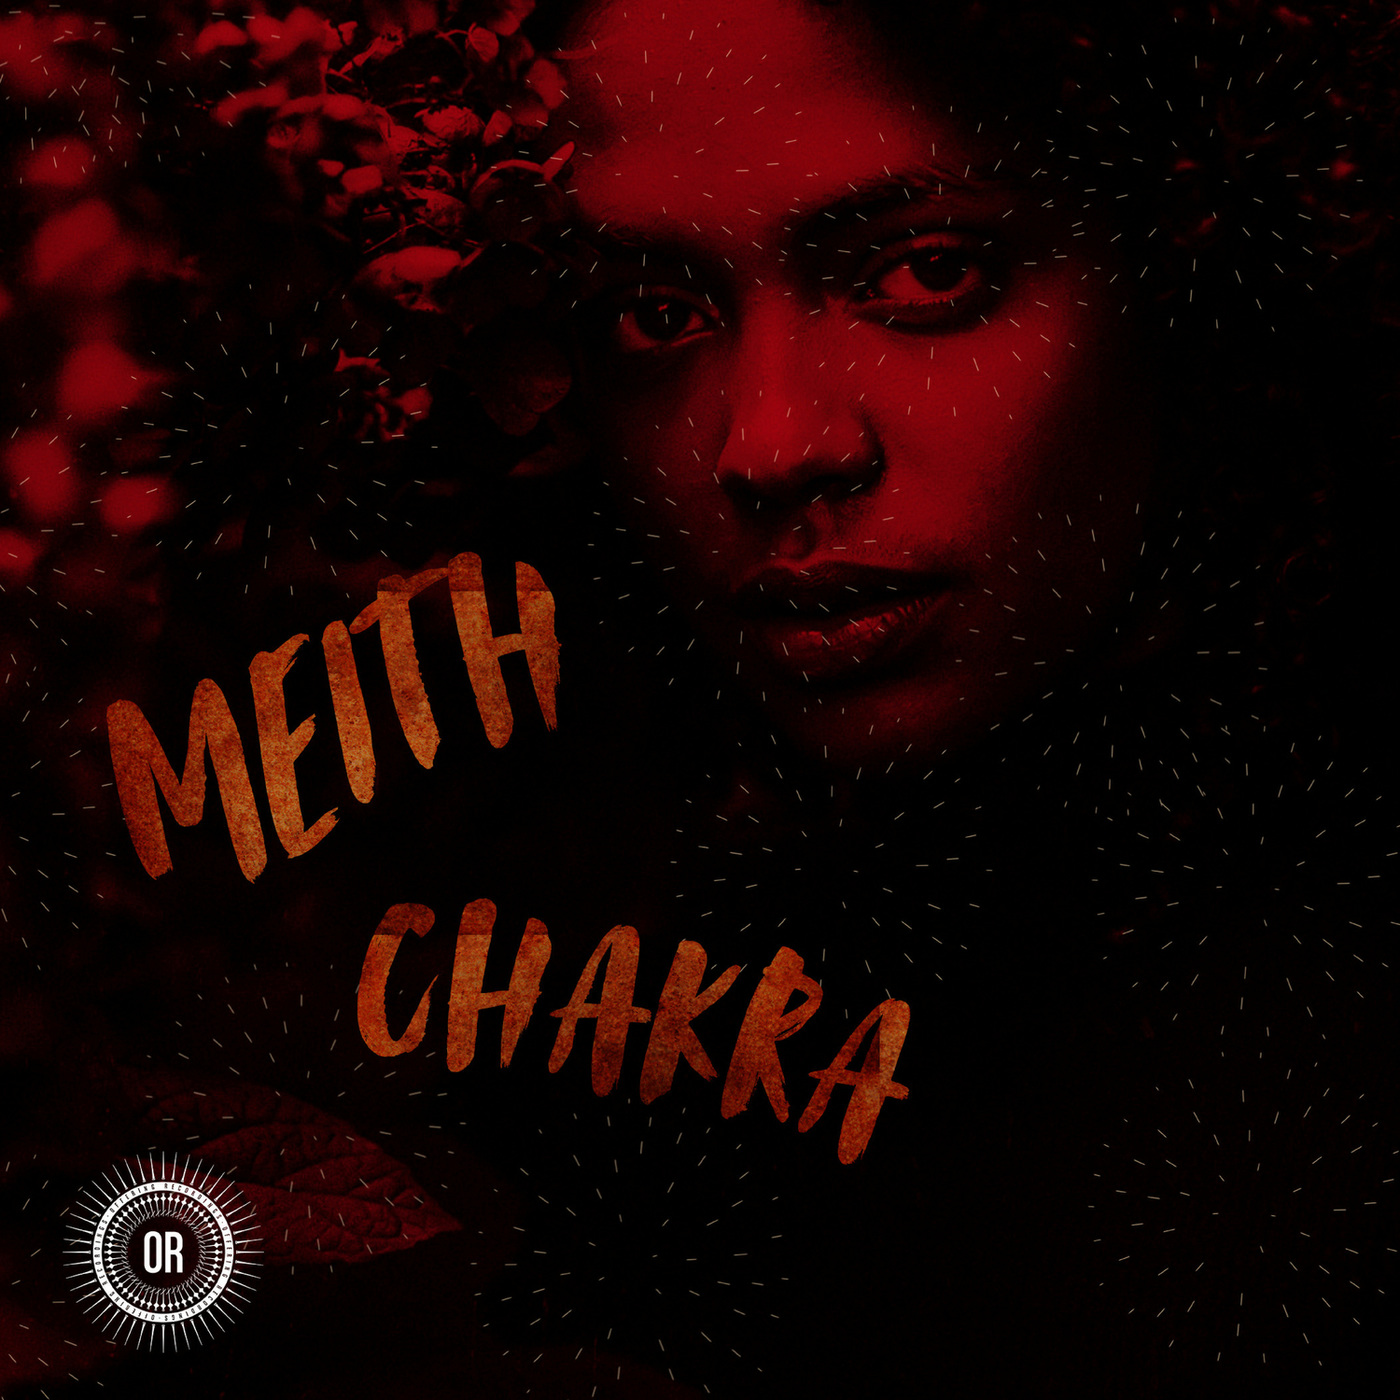 Meith - Chakra / Offering Recordings